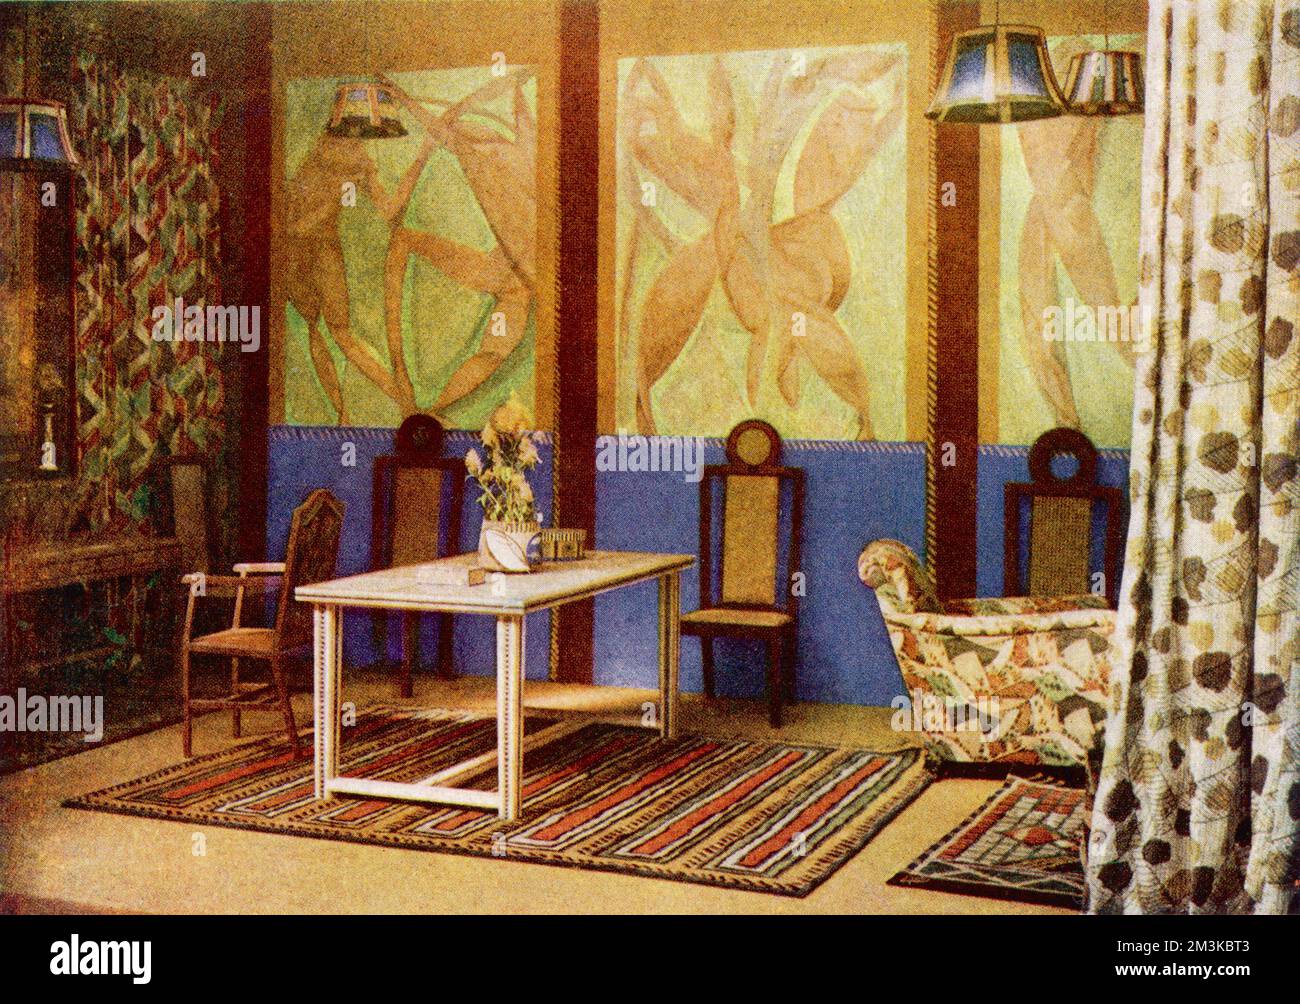 A room inspired by post-impressionism designed by Roger Fry, where everything, including the furniture and ornaments were cubist. It was created by the Omega Workshops, a London design studio set up in 1913 by Fry.     Date: 25th October 1913 Stock Photo